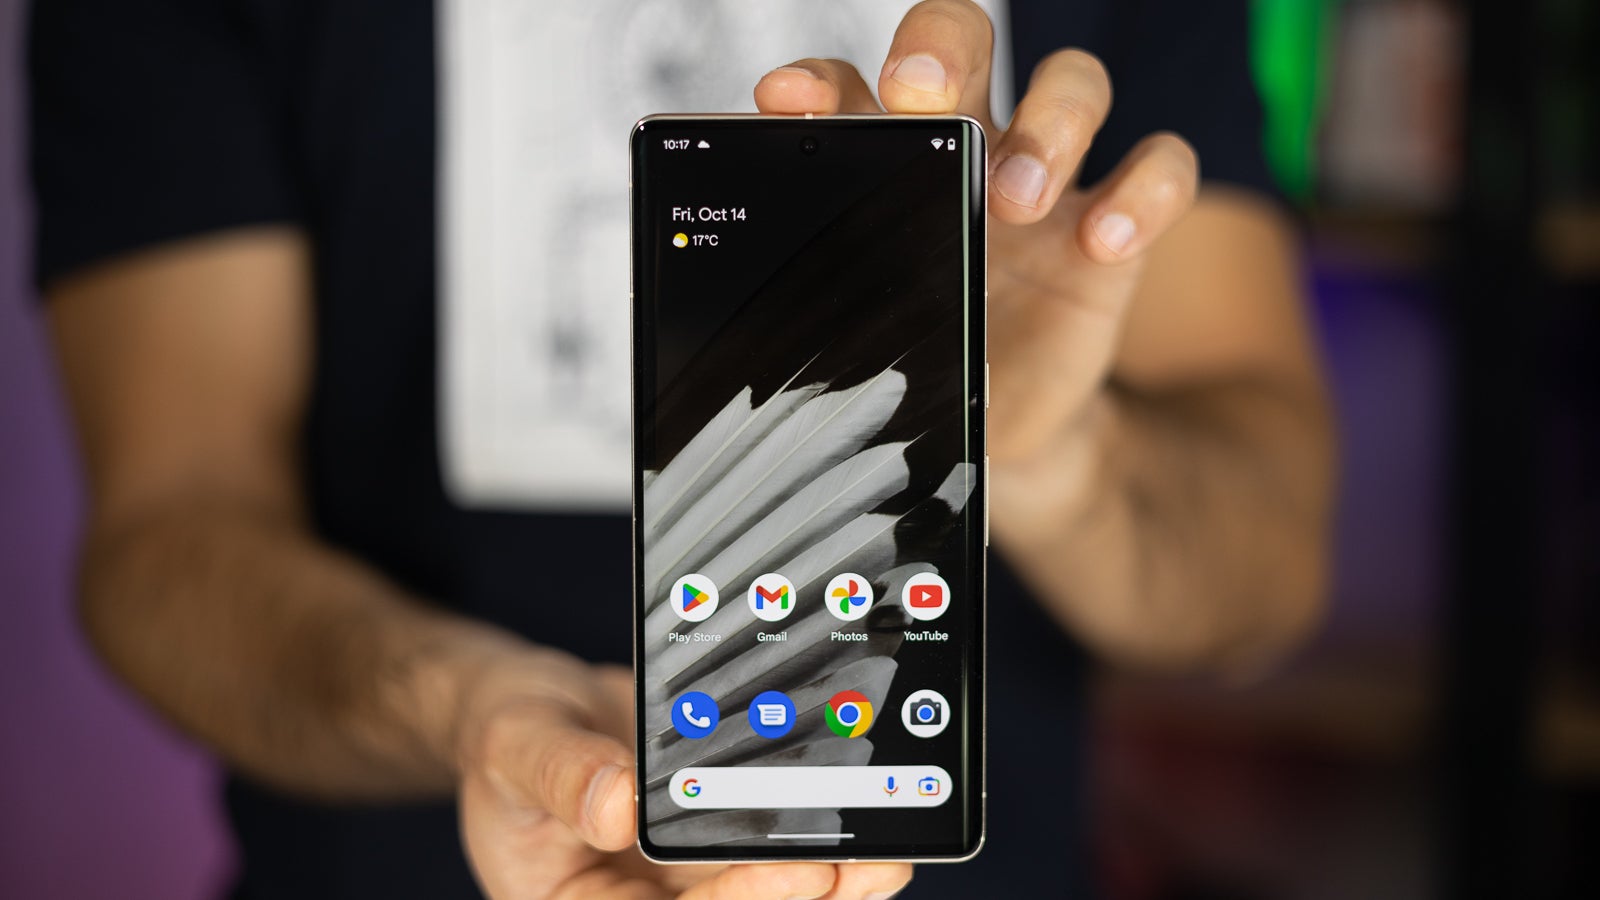 Google Pixel 7 Pro - Google Fi’s latest offer has both Pixel 7 Pro and Pixel 7 available for free (trade-in required)